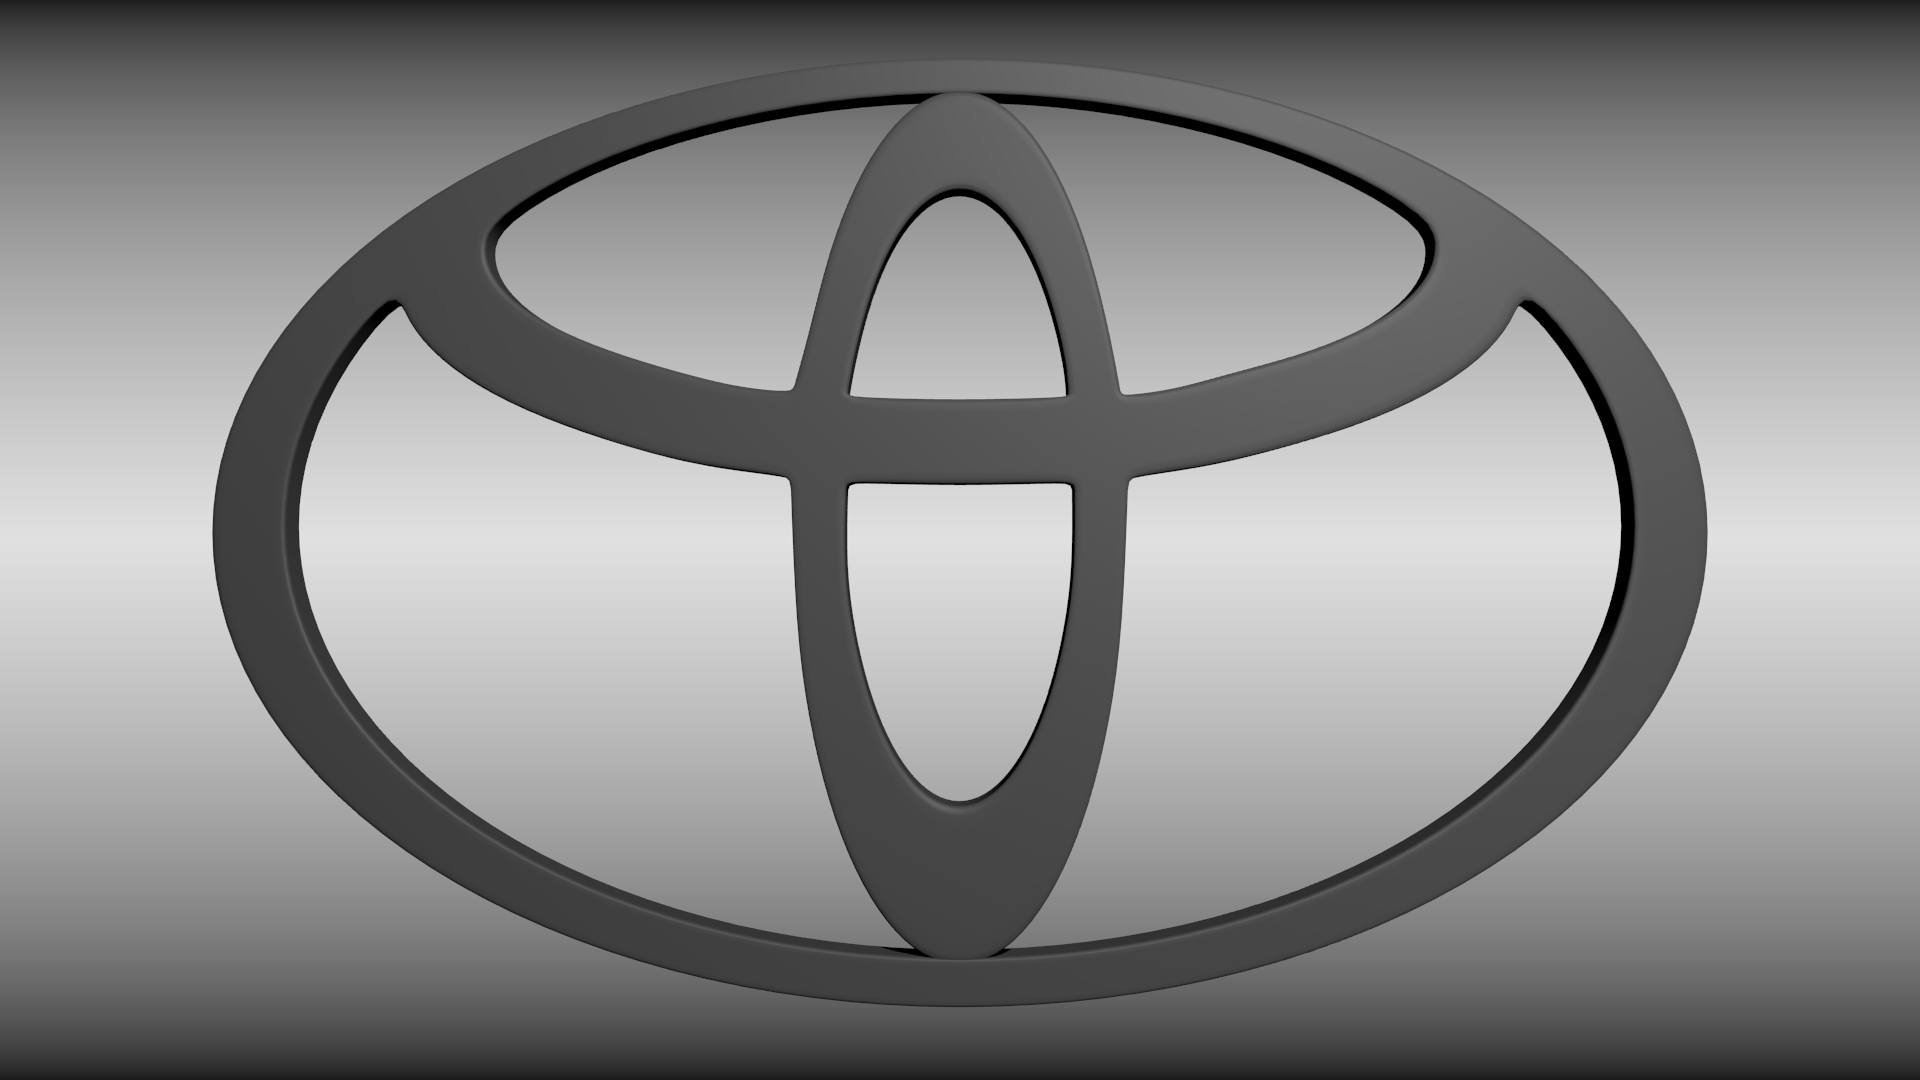 1920x1080 Free download for toyota logo displaying 11 images for toyota logo toolbar creator [] for your Desktop, Mobile \u0026 Tablet | Explore 77+ Toyota Logo Wallpaper | Toyota Tacoma Wallpaper, Toyota Desktop